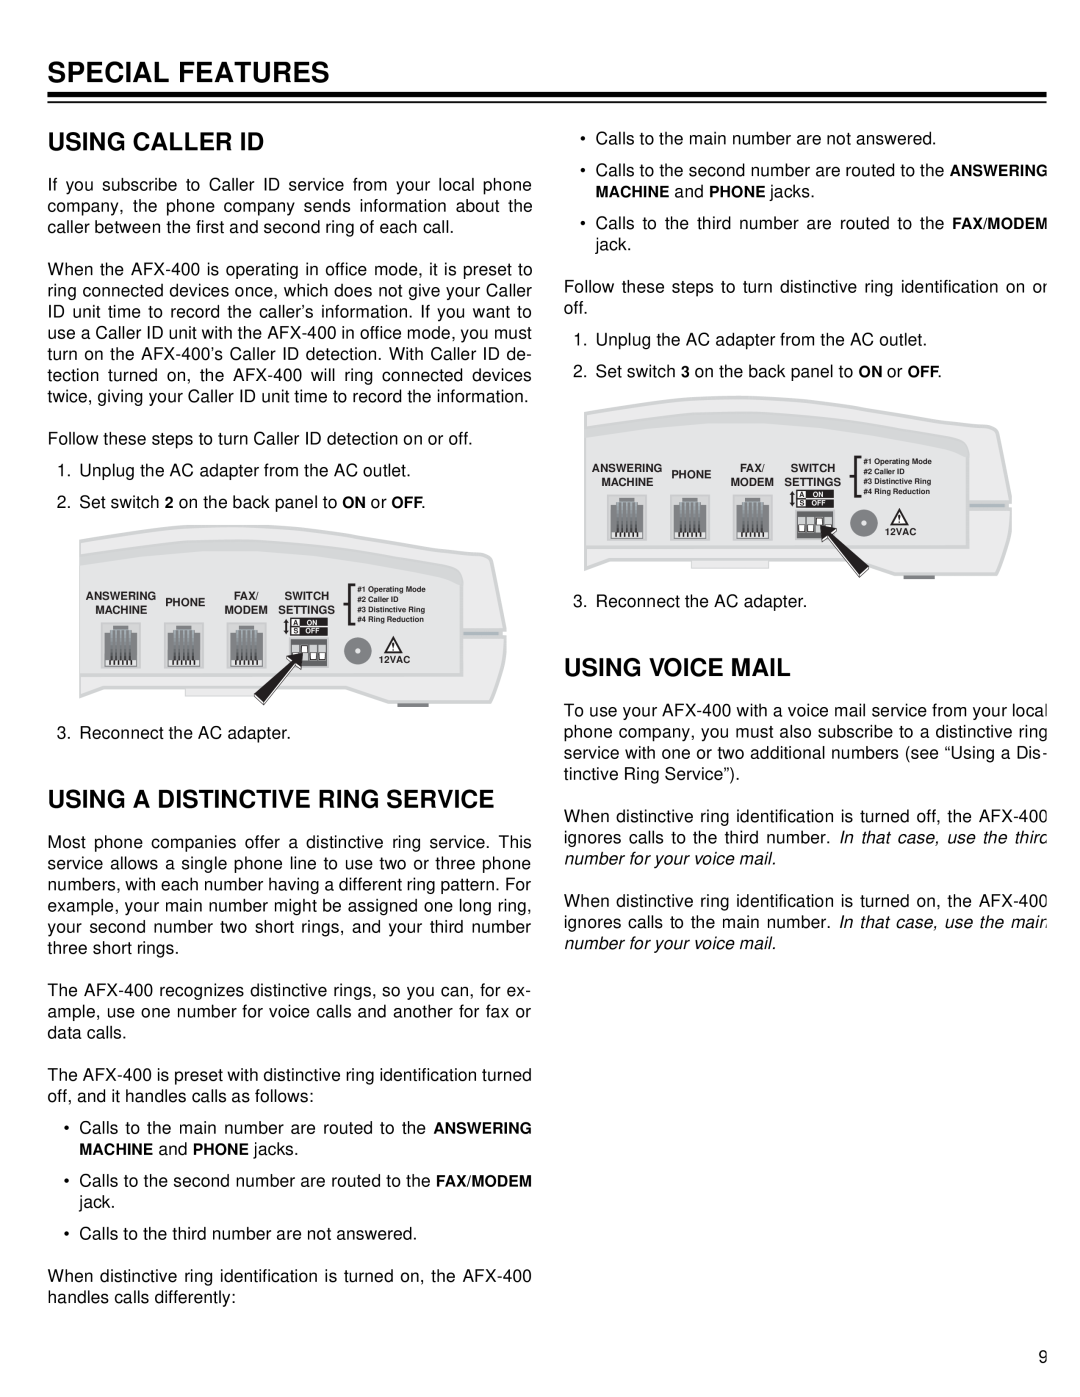 Radio Shack AFX-400 owner manual Special Features, Using Caller Id, Using A Distinctive Ring Service, Using Voice Mail 